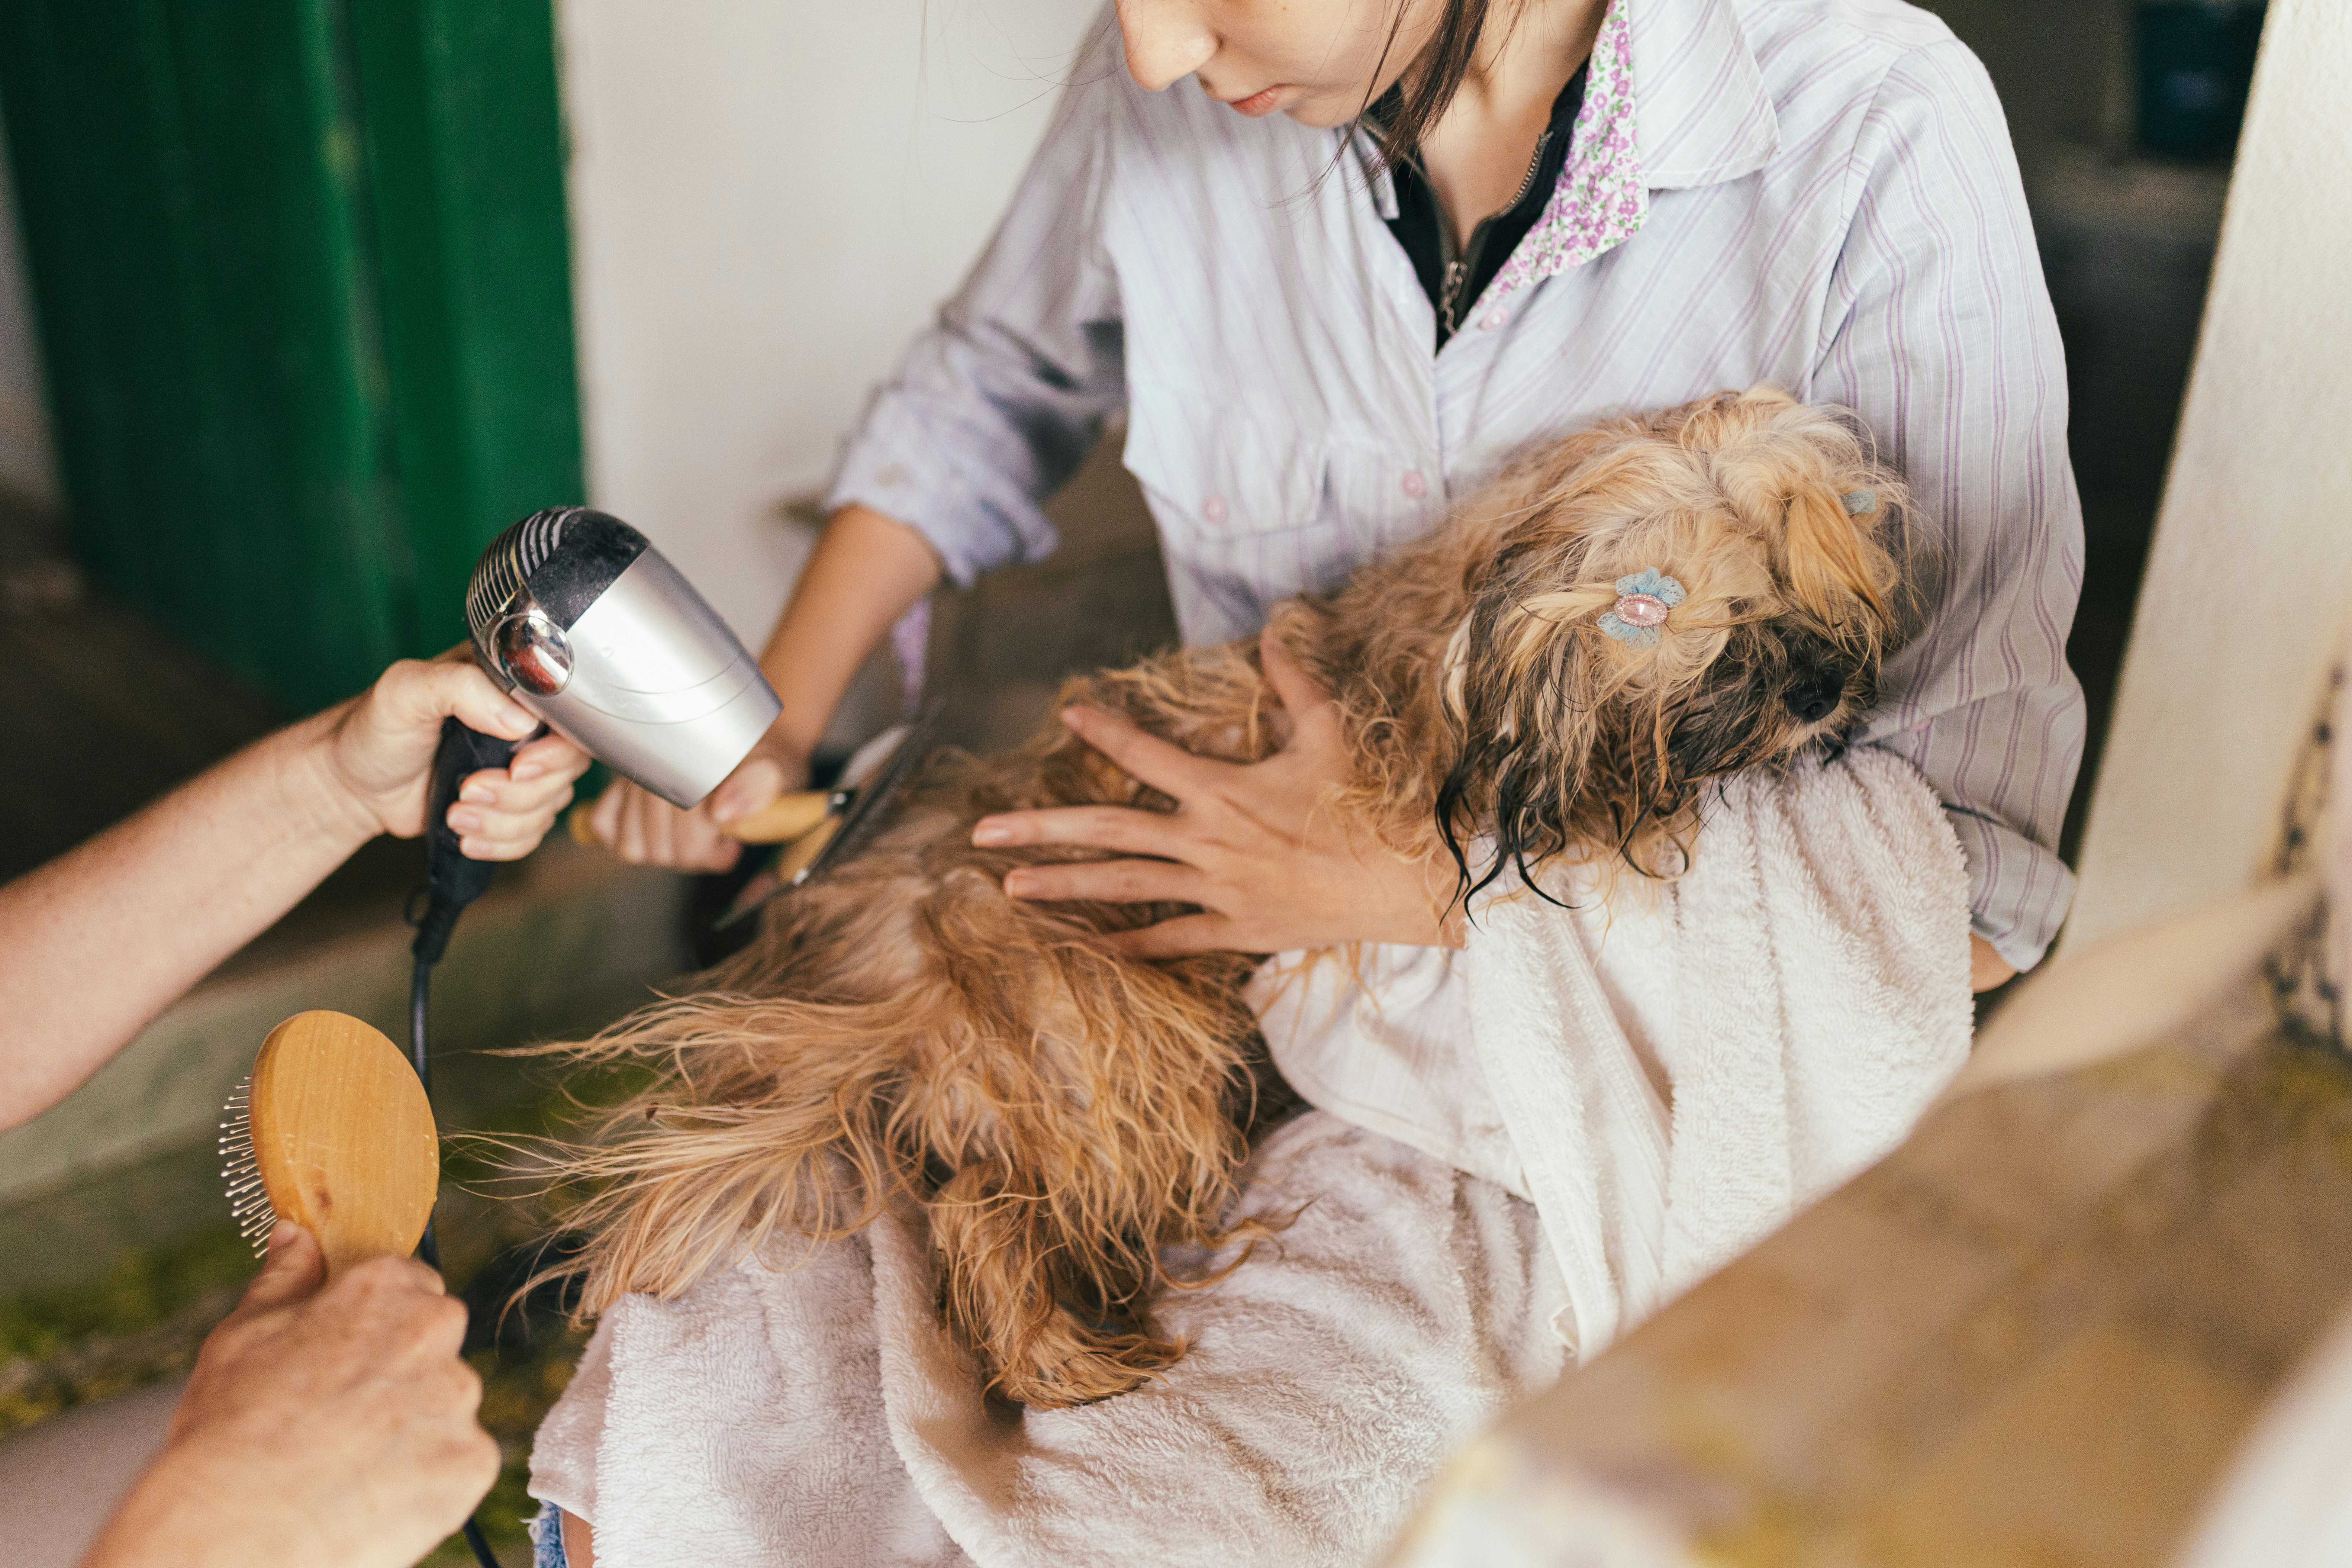 How Can I Pamper My Dog At Home?